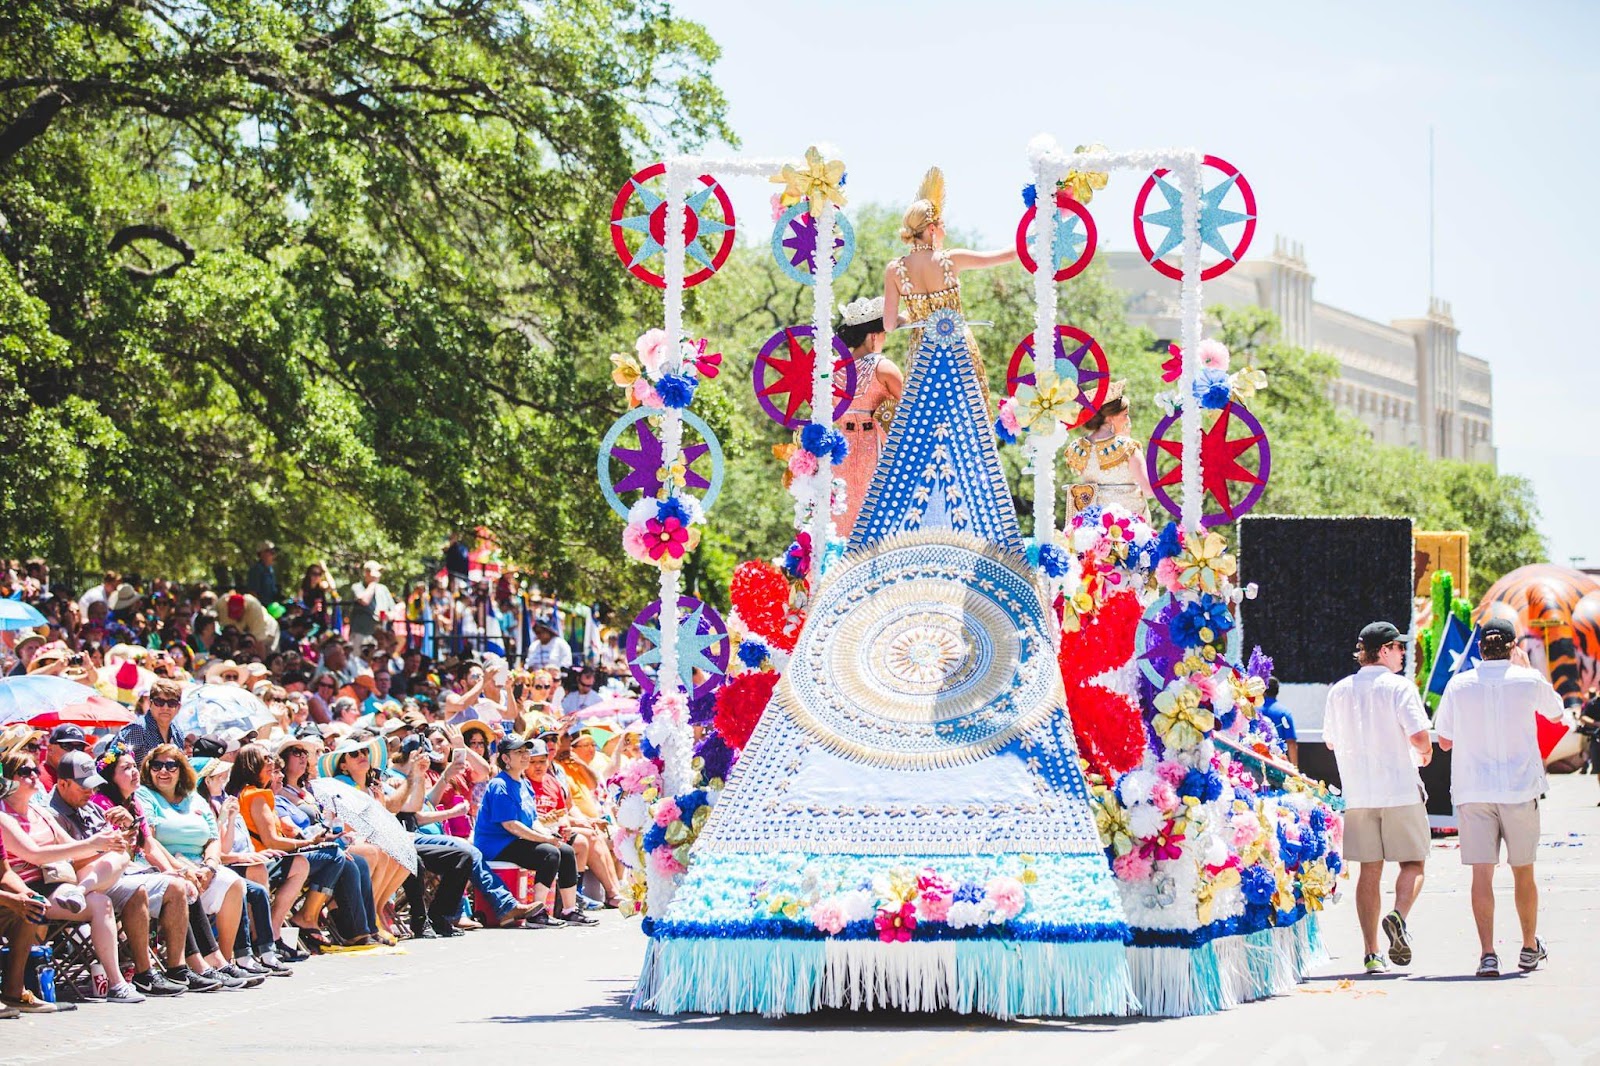 25 Things to Do in San Antonio in April